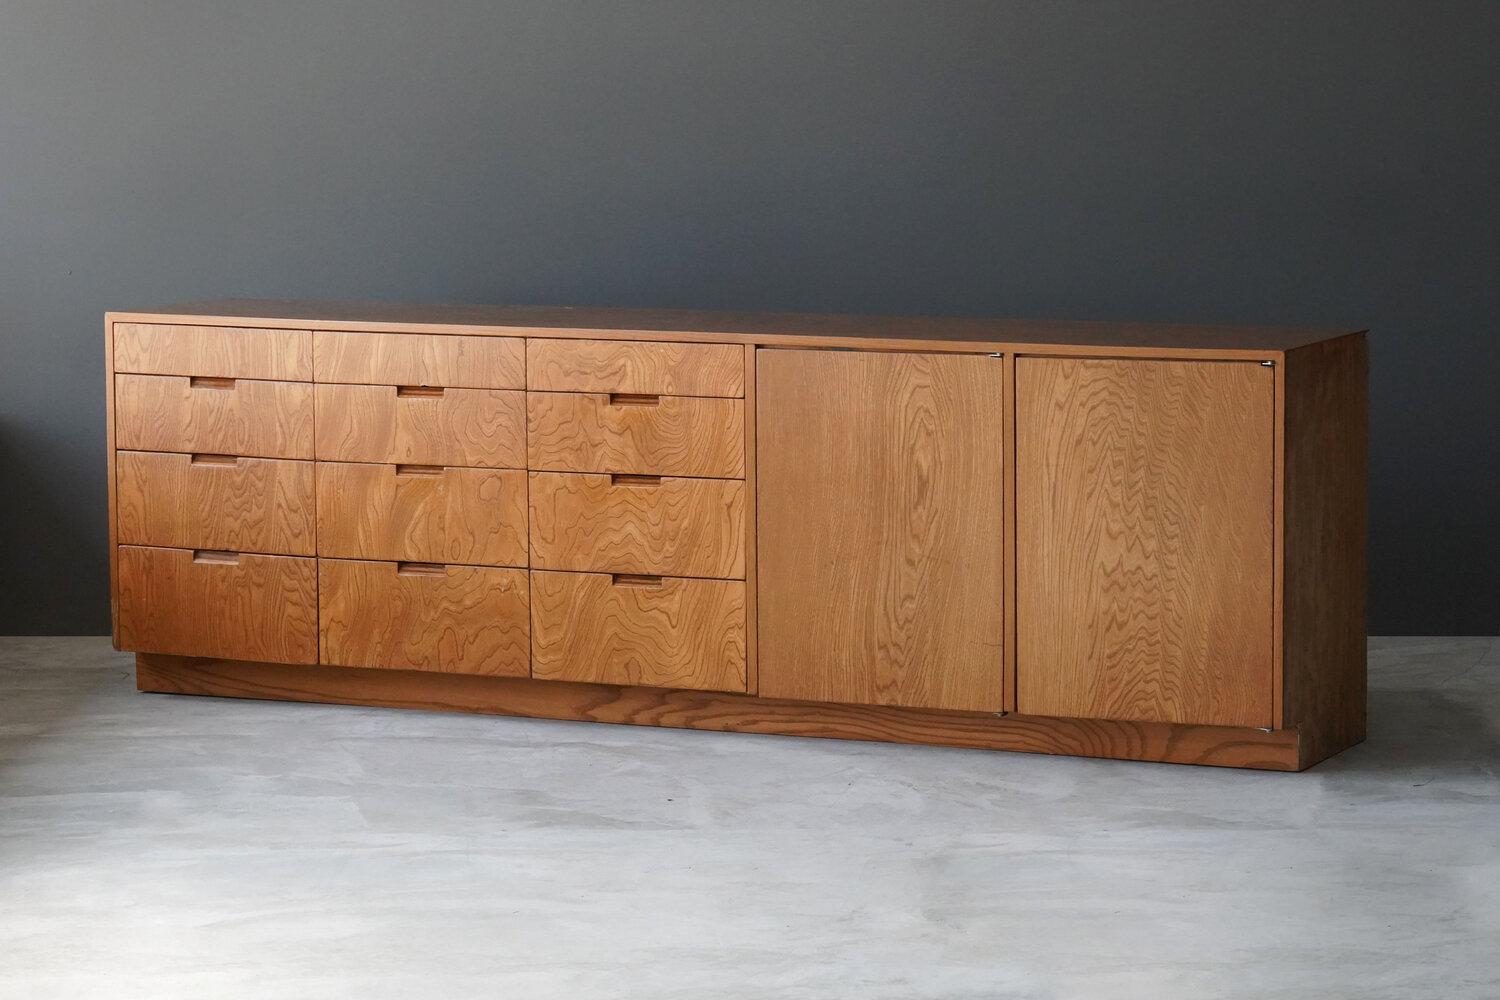 A unique and large sideboard / cabinet / chest. Designed by Richard Neutra for the Brown Sidney House, Holmby Hills, Los Angeles. Detailed provenance available upon request, circa 1955.

Other designers of the period include Paul Frankl, T.H.